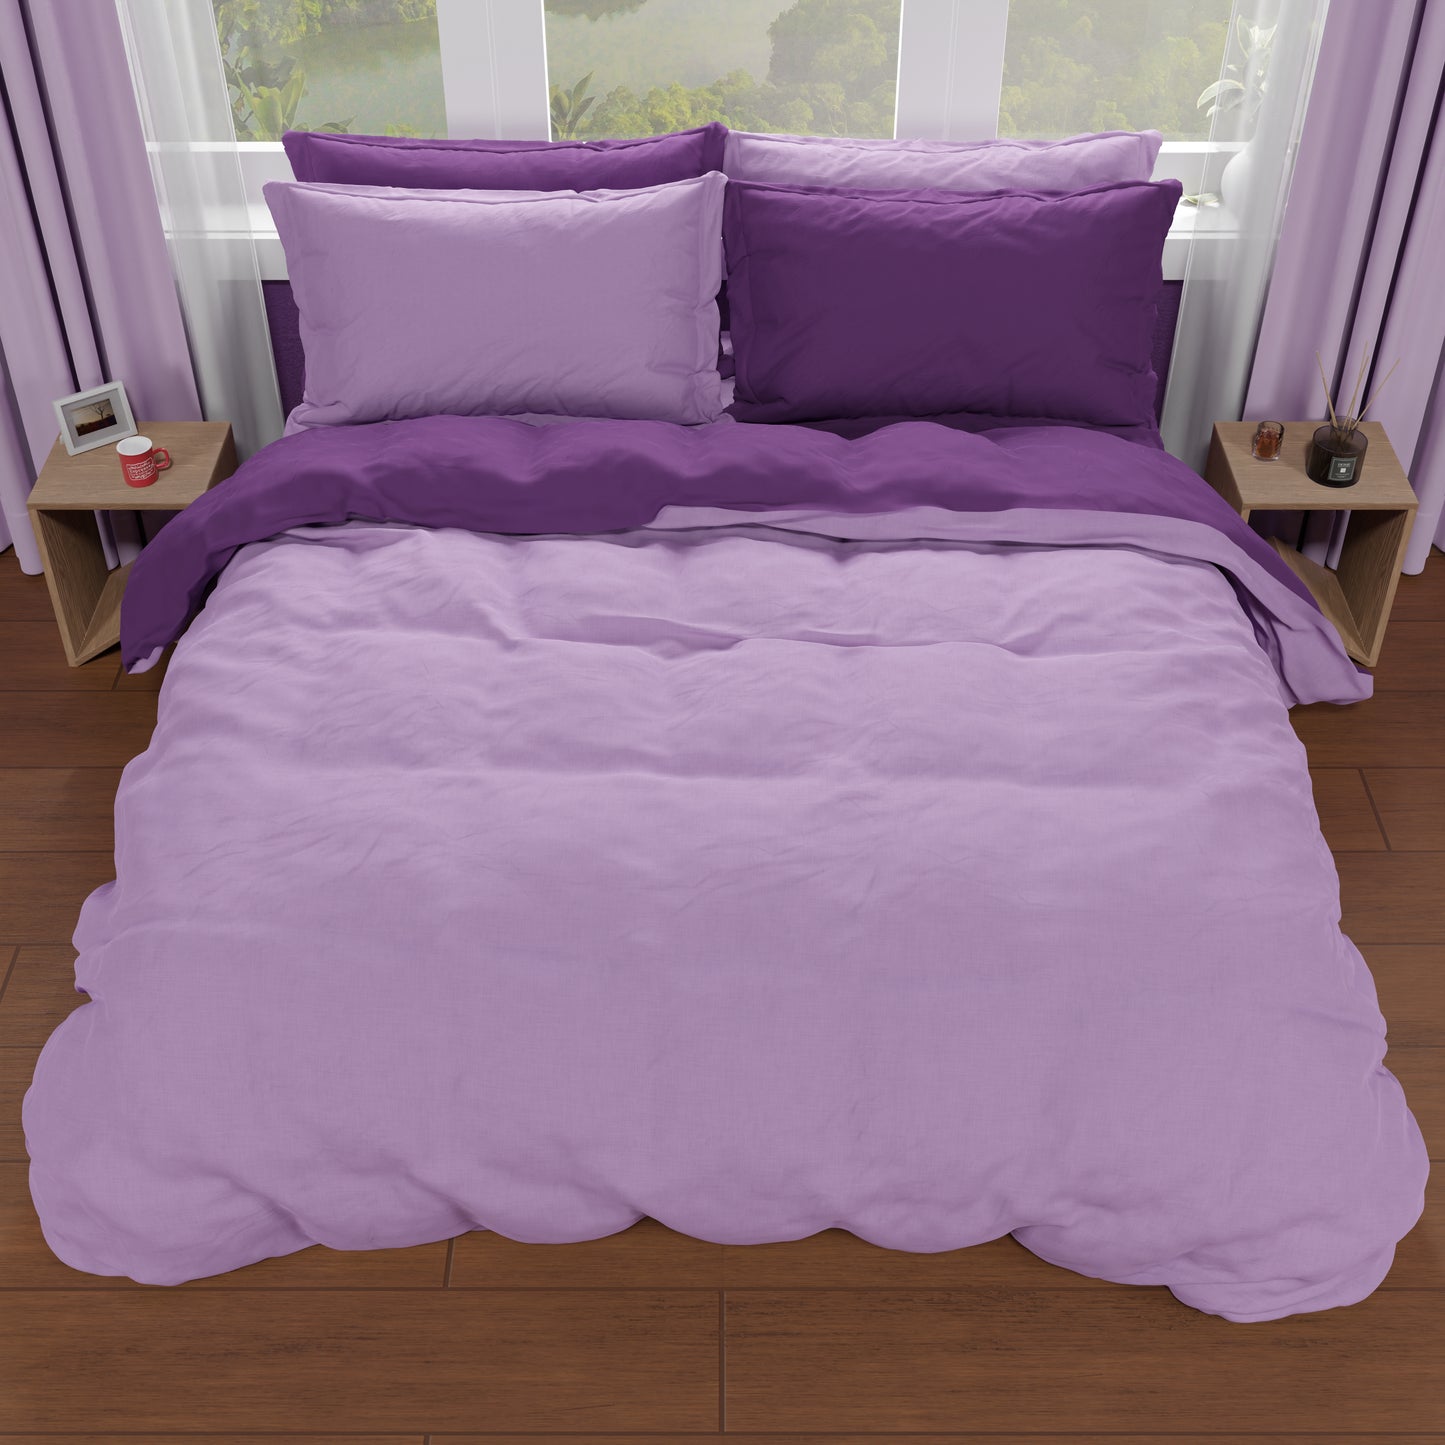 Double Duvet Cover, Duvet Cover and Pillowcases, Lilac/Purple